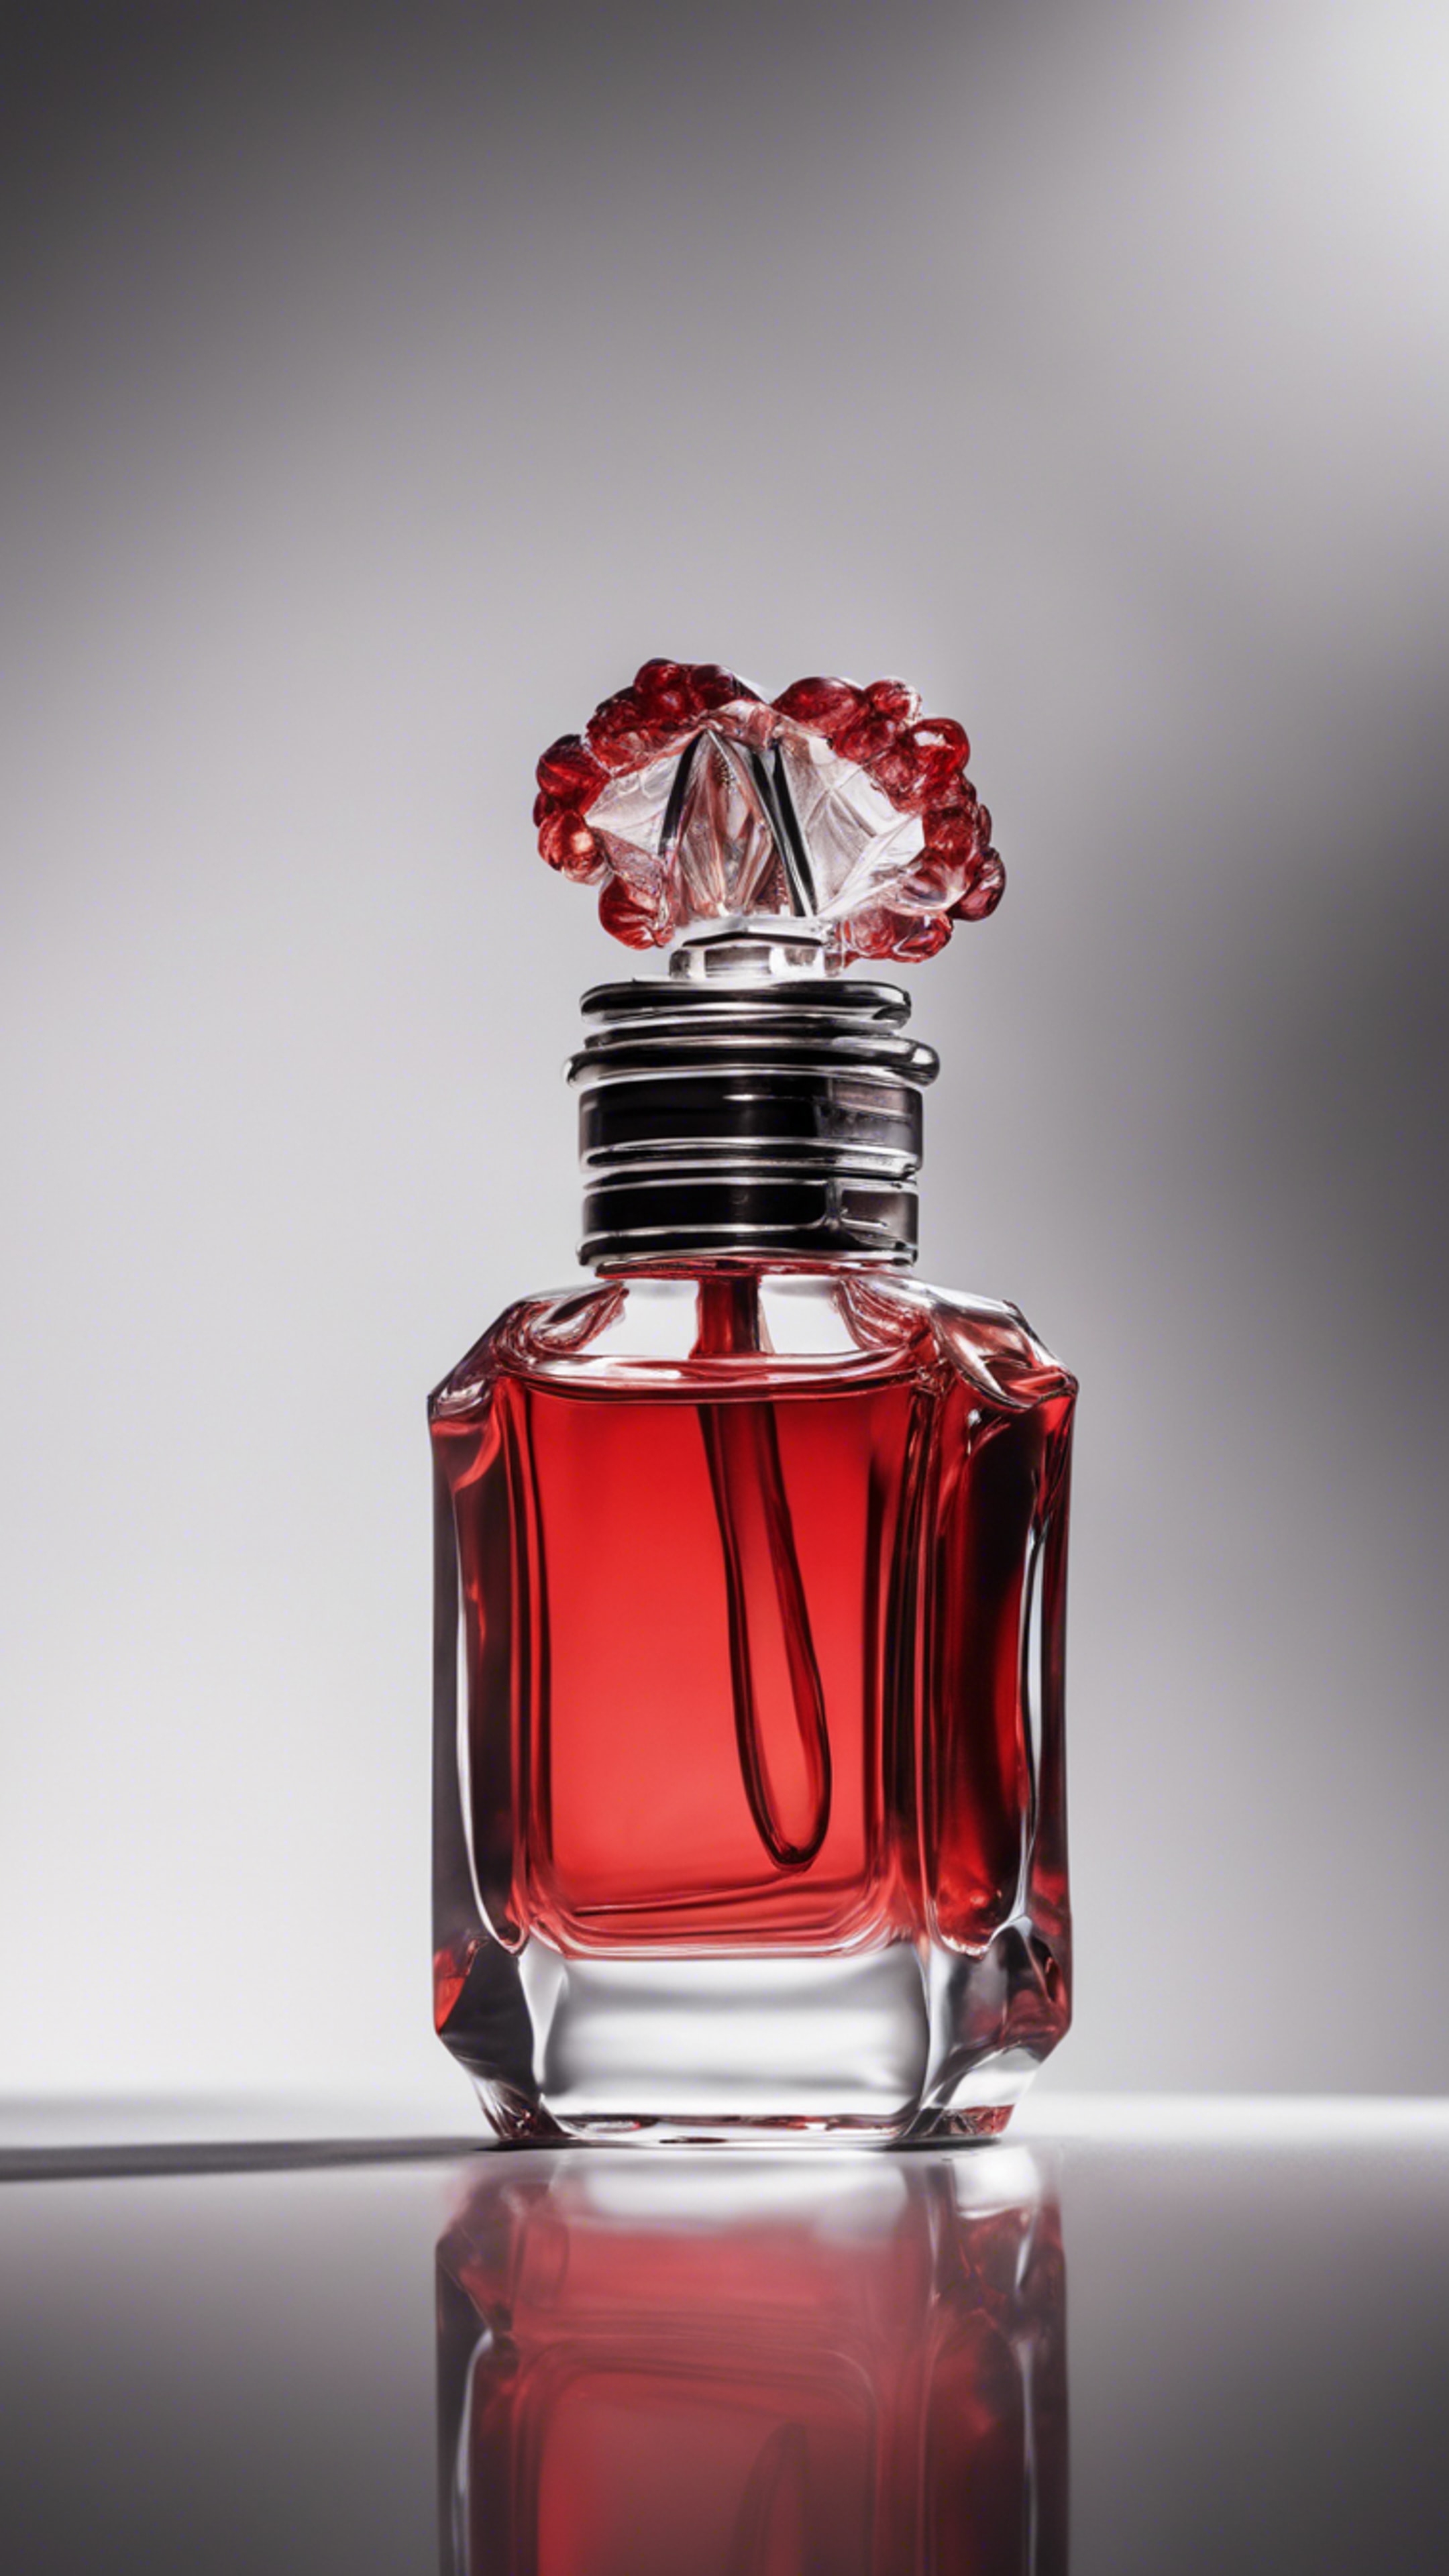 The portrait of a sassy red perfume bottle clashing against a pure white backdrop. Tapeta na zeď[8445b62606744831bb5a]